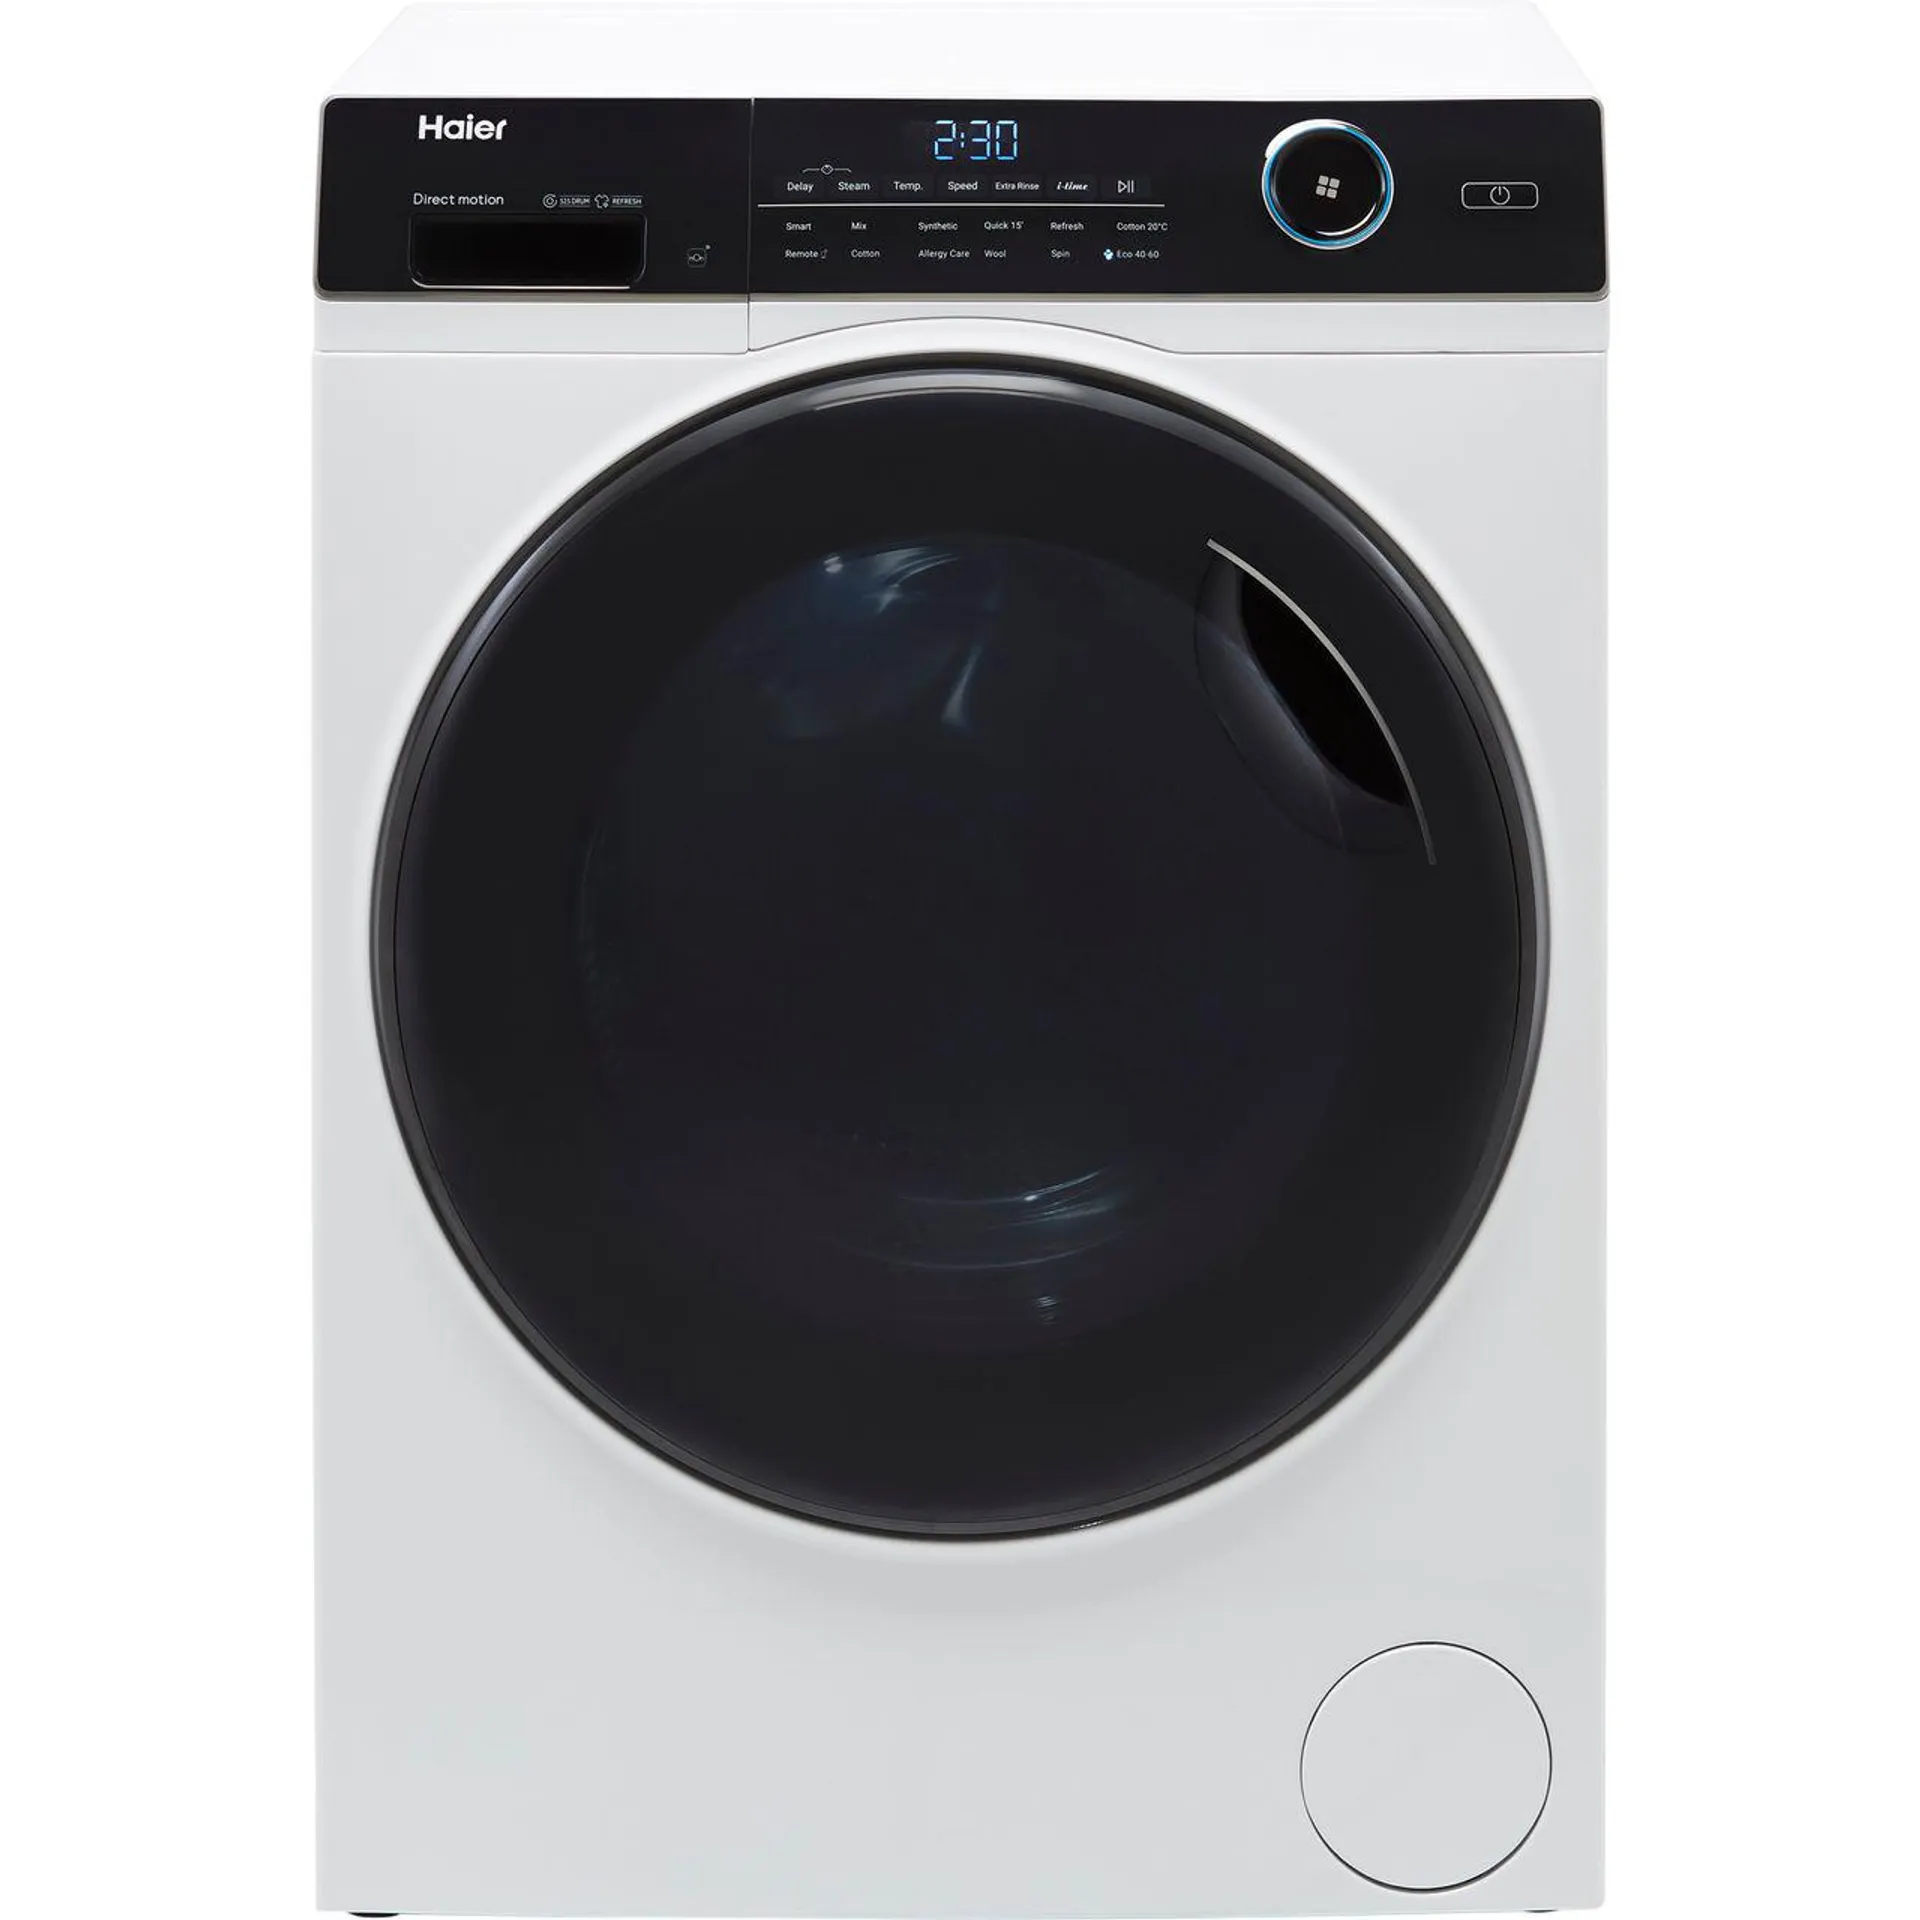 Haier i-Pro Series 5 HW80-B14959TU1 8Kg Washing Machine with 1400 rpm - White - A Rated